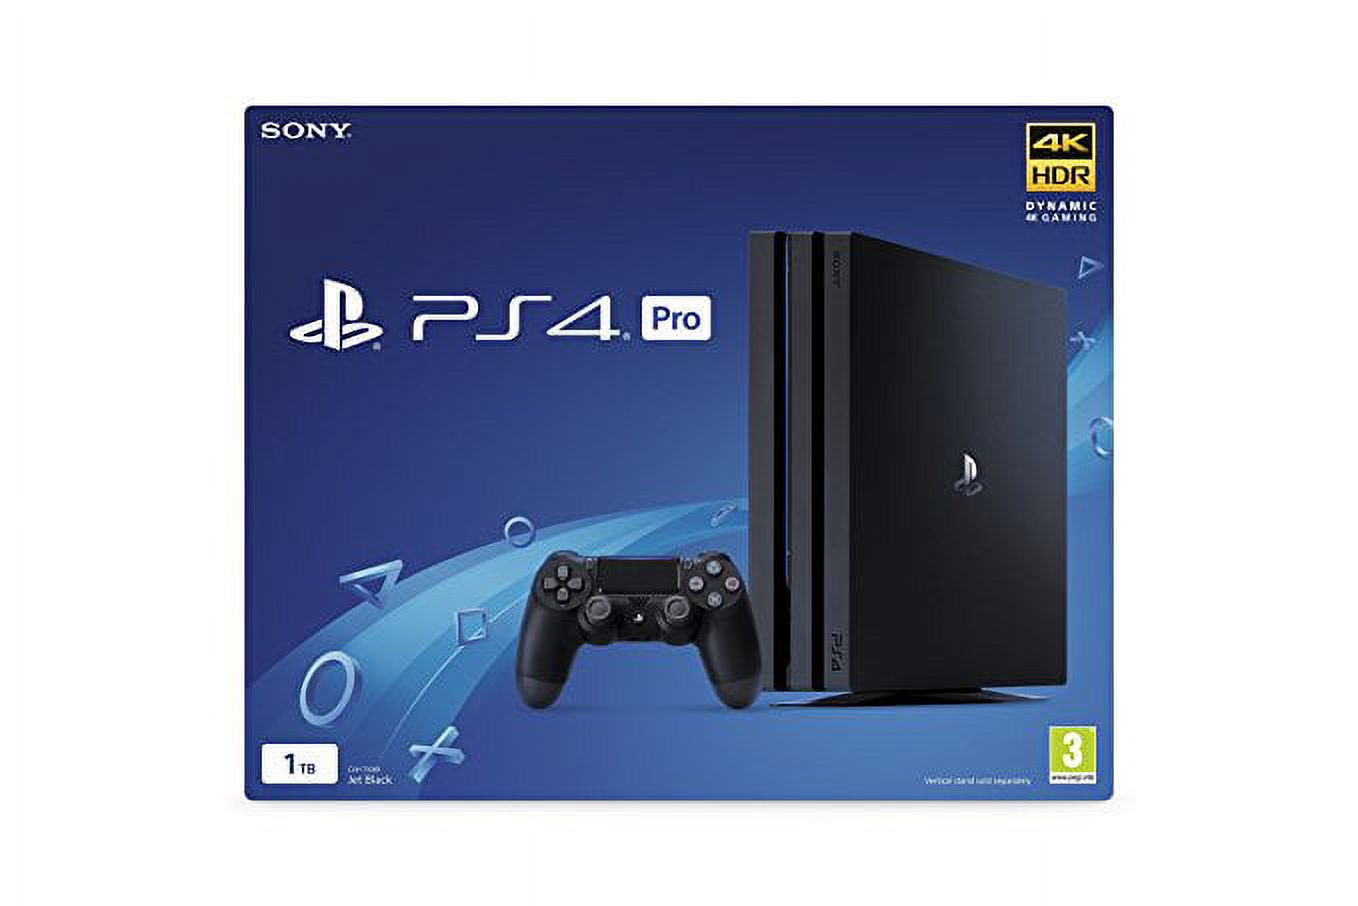 Restored Sony PlayStation 4 Pro 1TB Console, Black, RB3001510 (Refurbished) - image 4 of 5